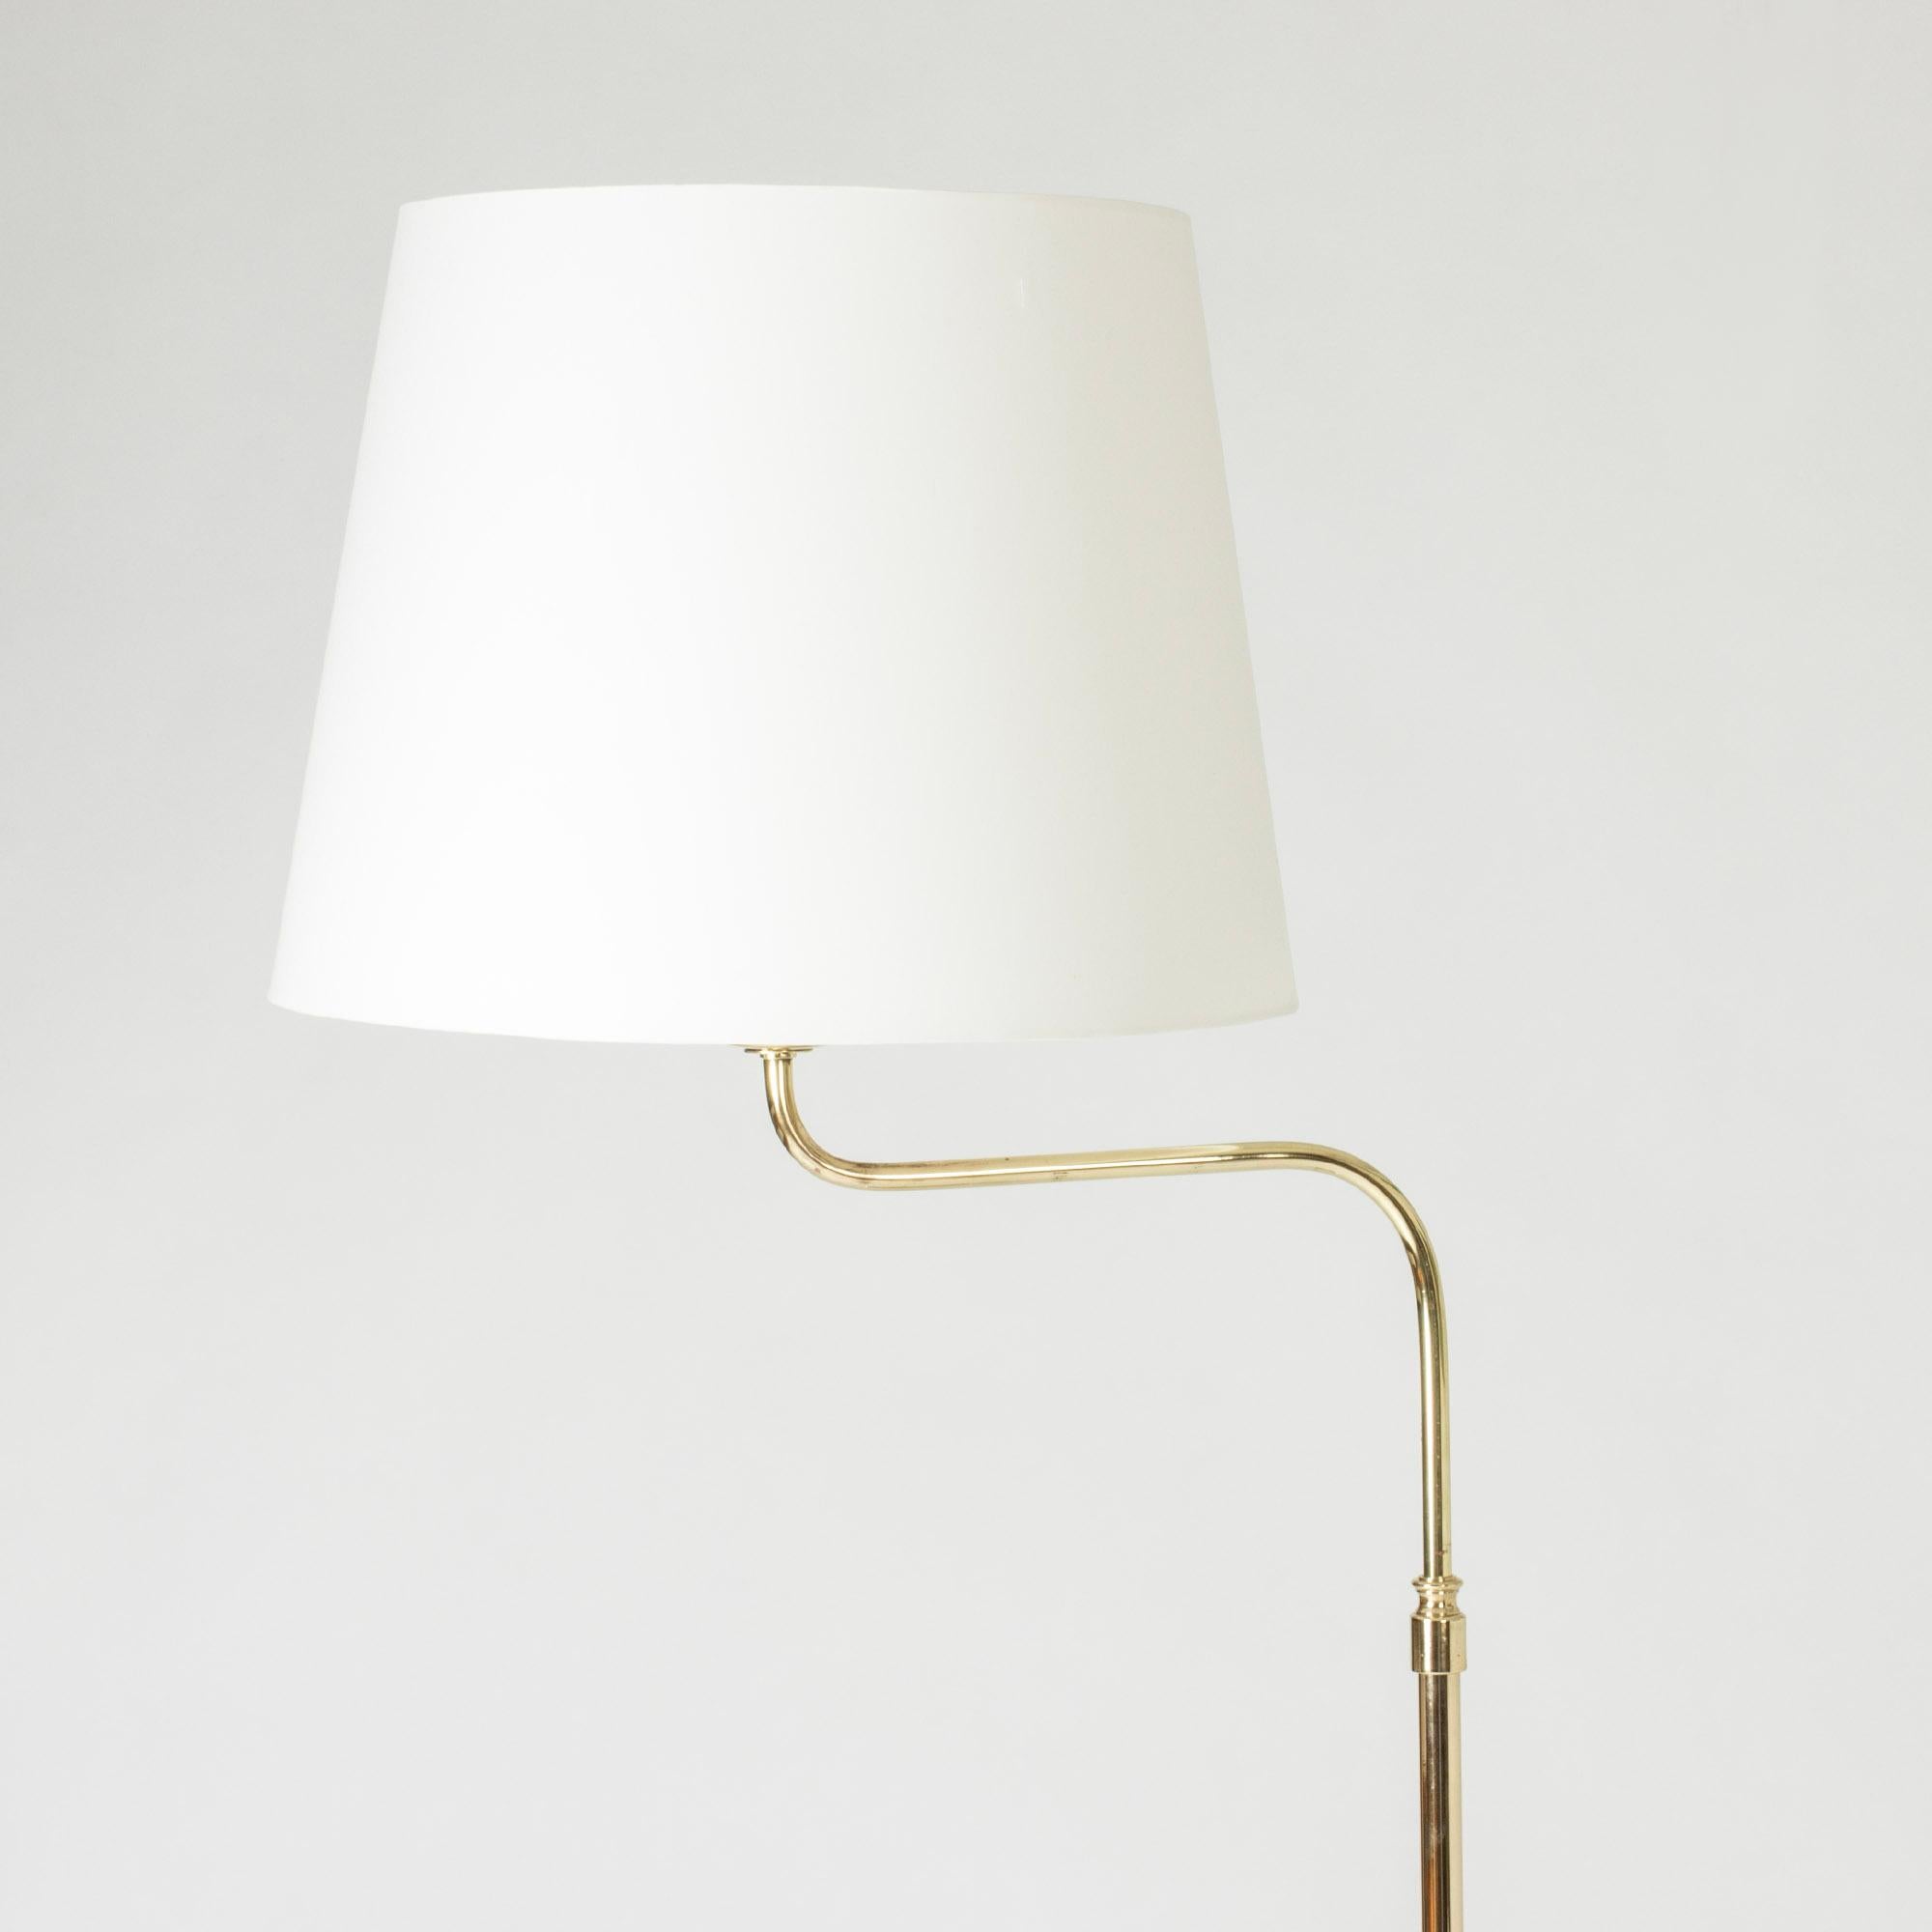 Elegant brass floor lamp from NK, with a shade whose position can be adjusted.

Measure: height 163-177 cm.